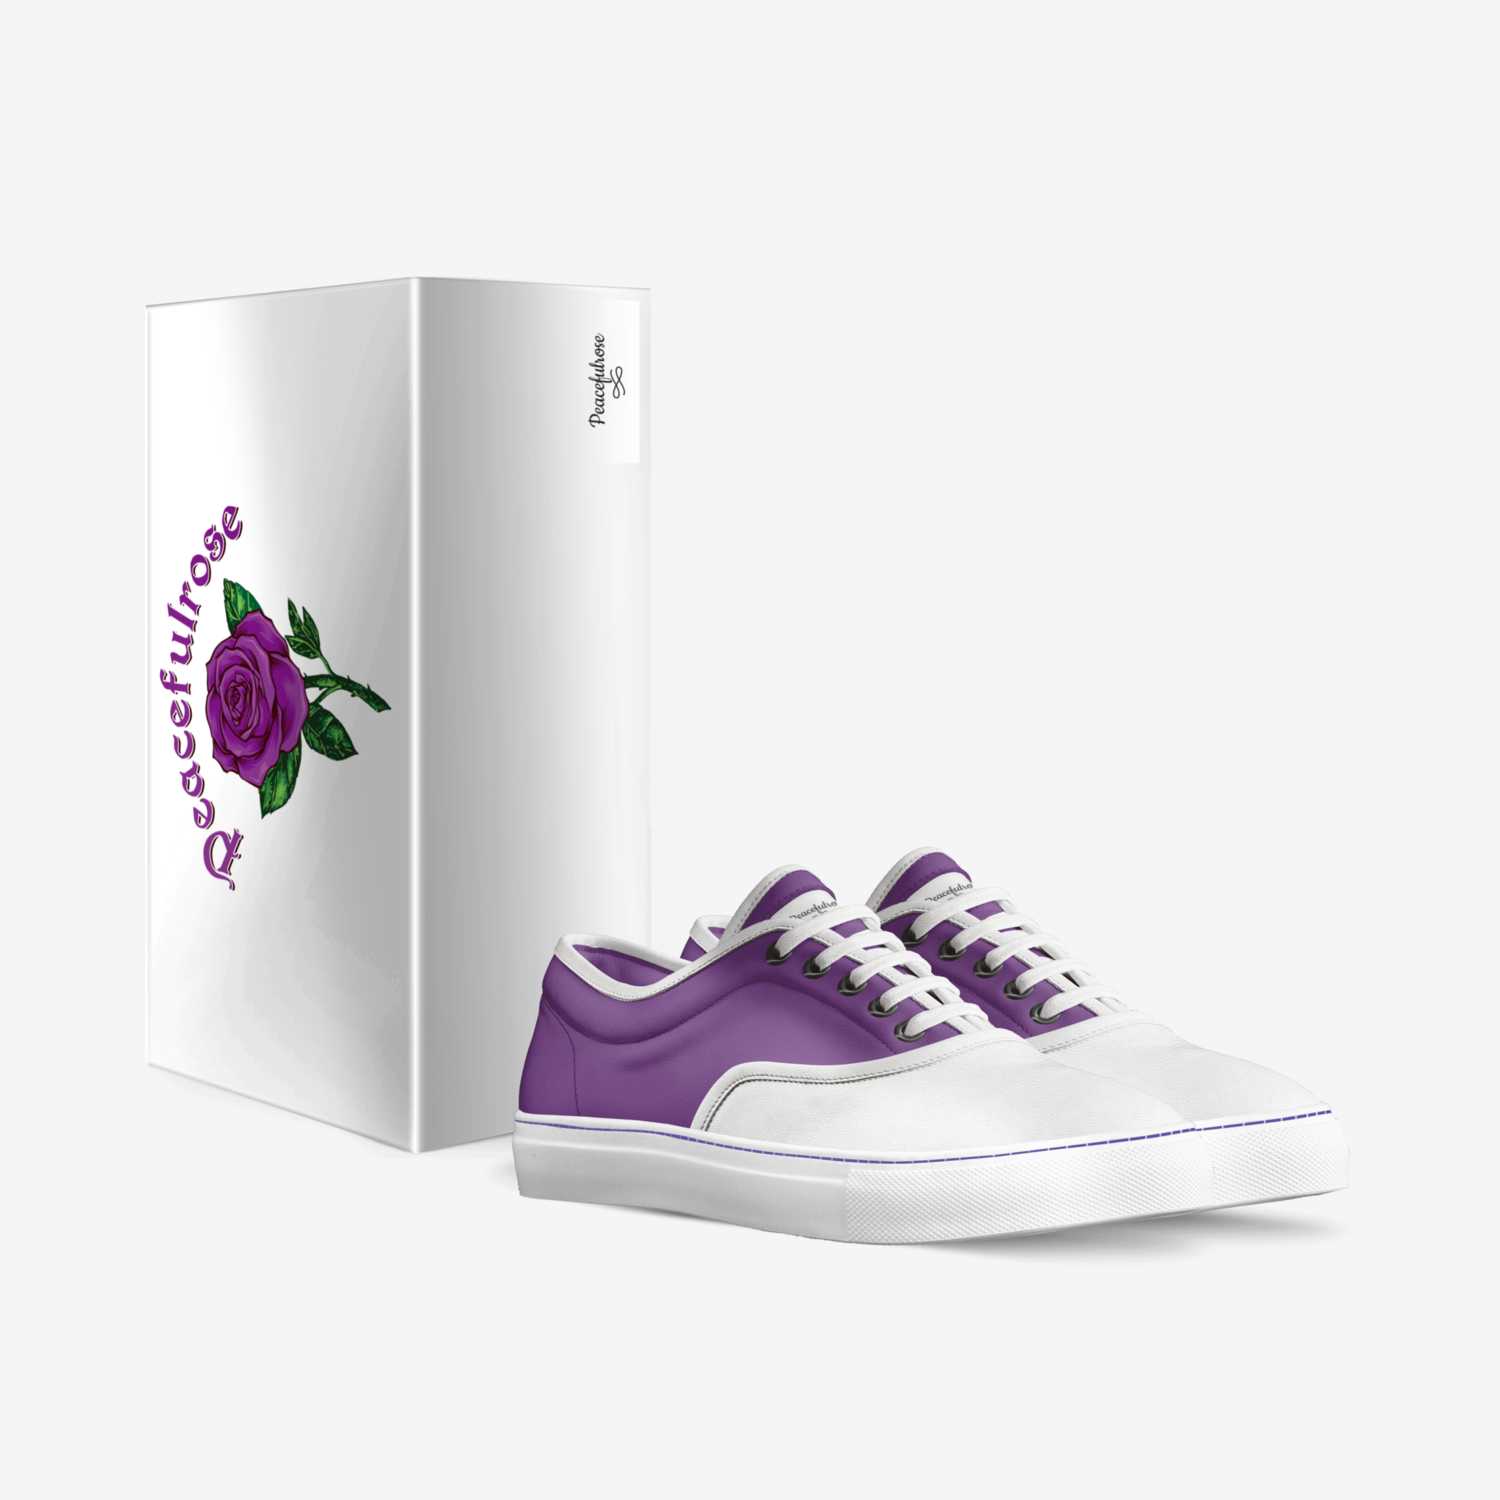 Peacefulrose custom made in Italy shoes by Peacefulrose | Box view